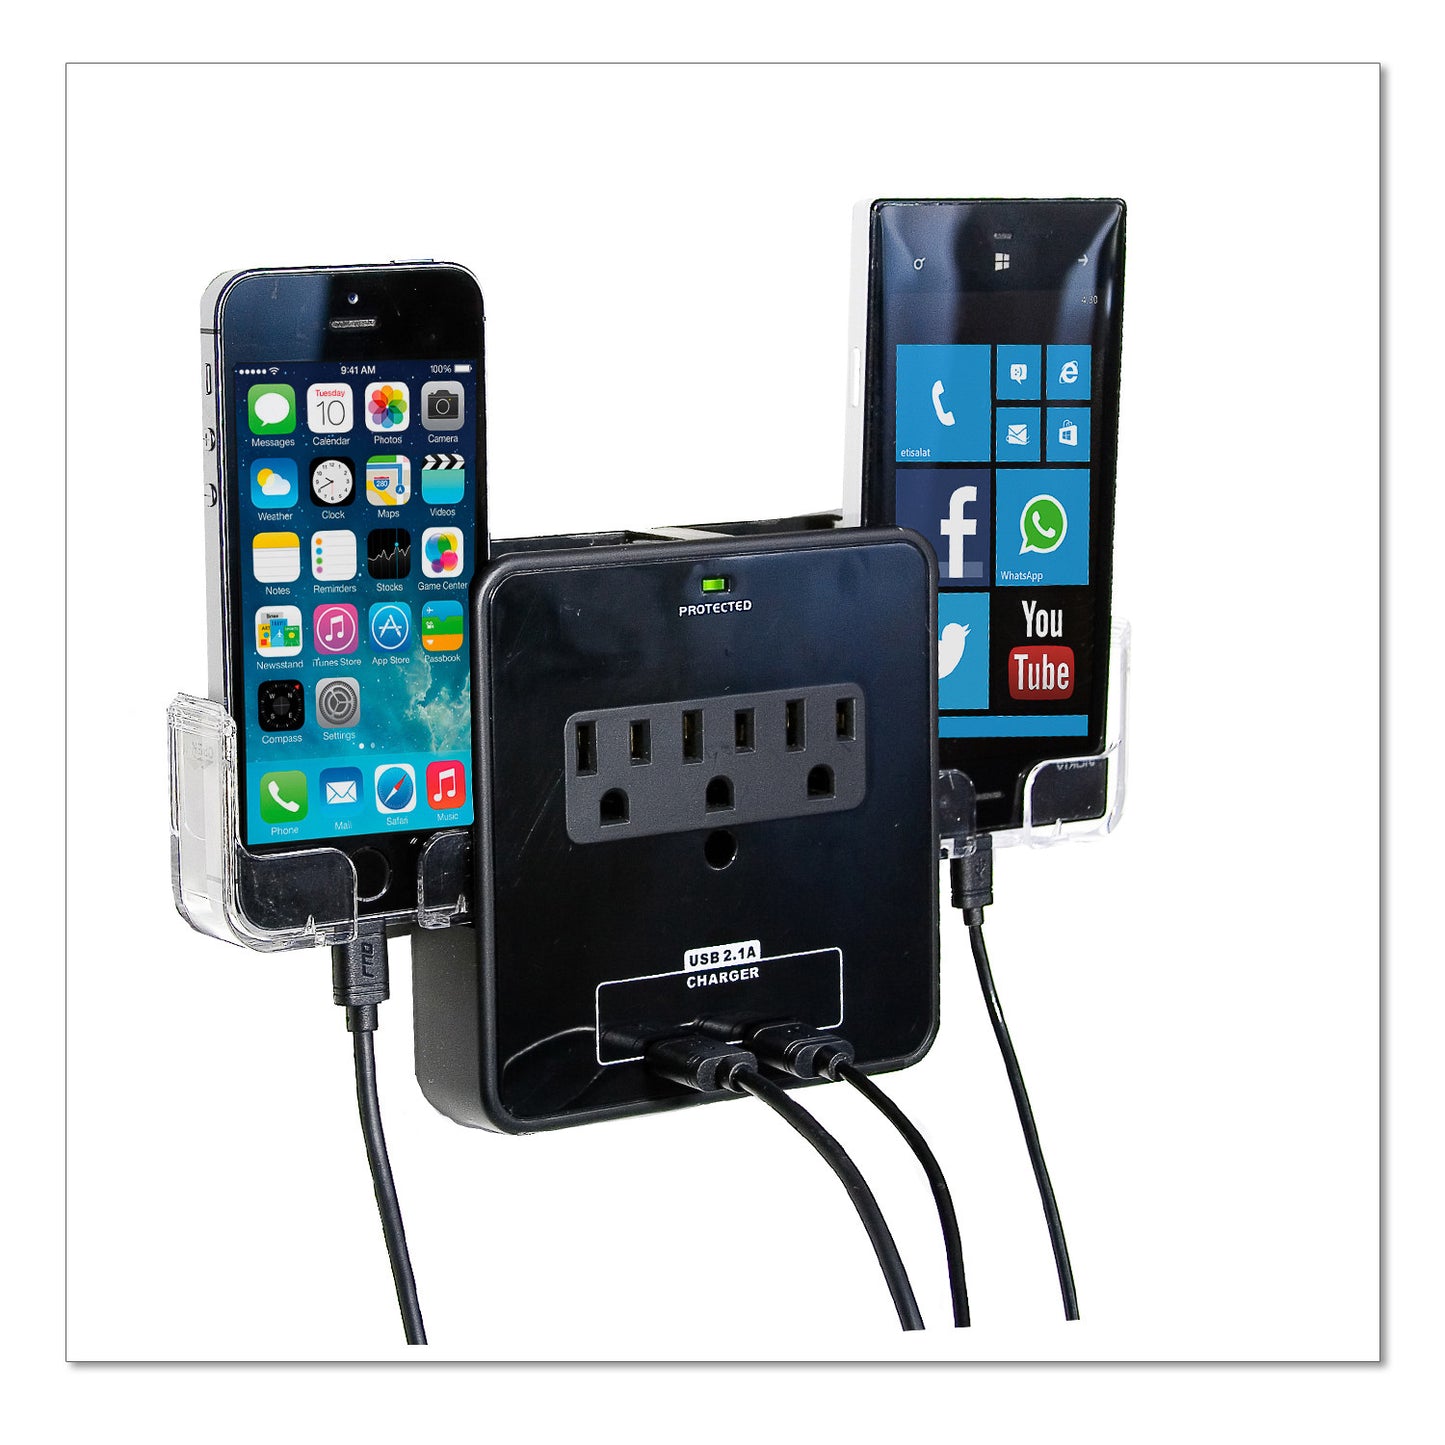 Wall Power Station includes 3 AC Plugs and 2 USB ports with Surge Protection and 2 slide-out holders for your smartphone by RND Power Solutions - RND Power Solutions - 6